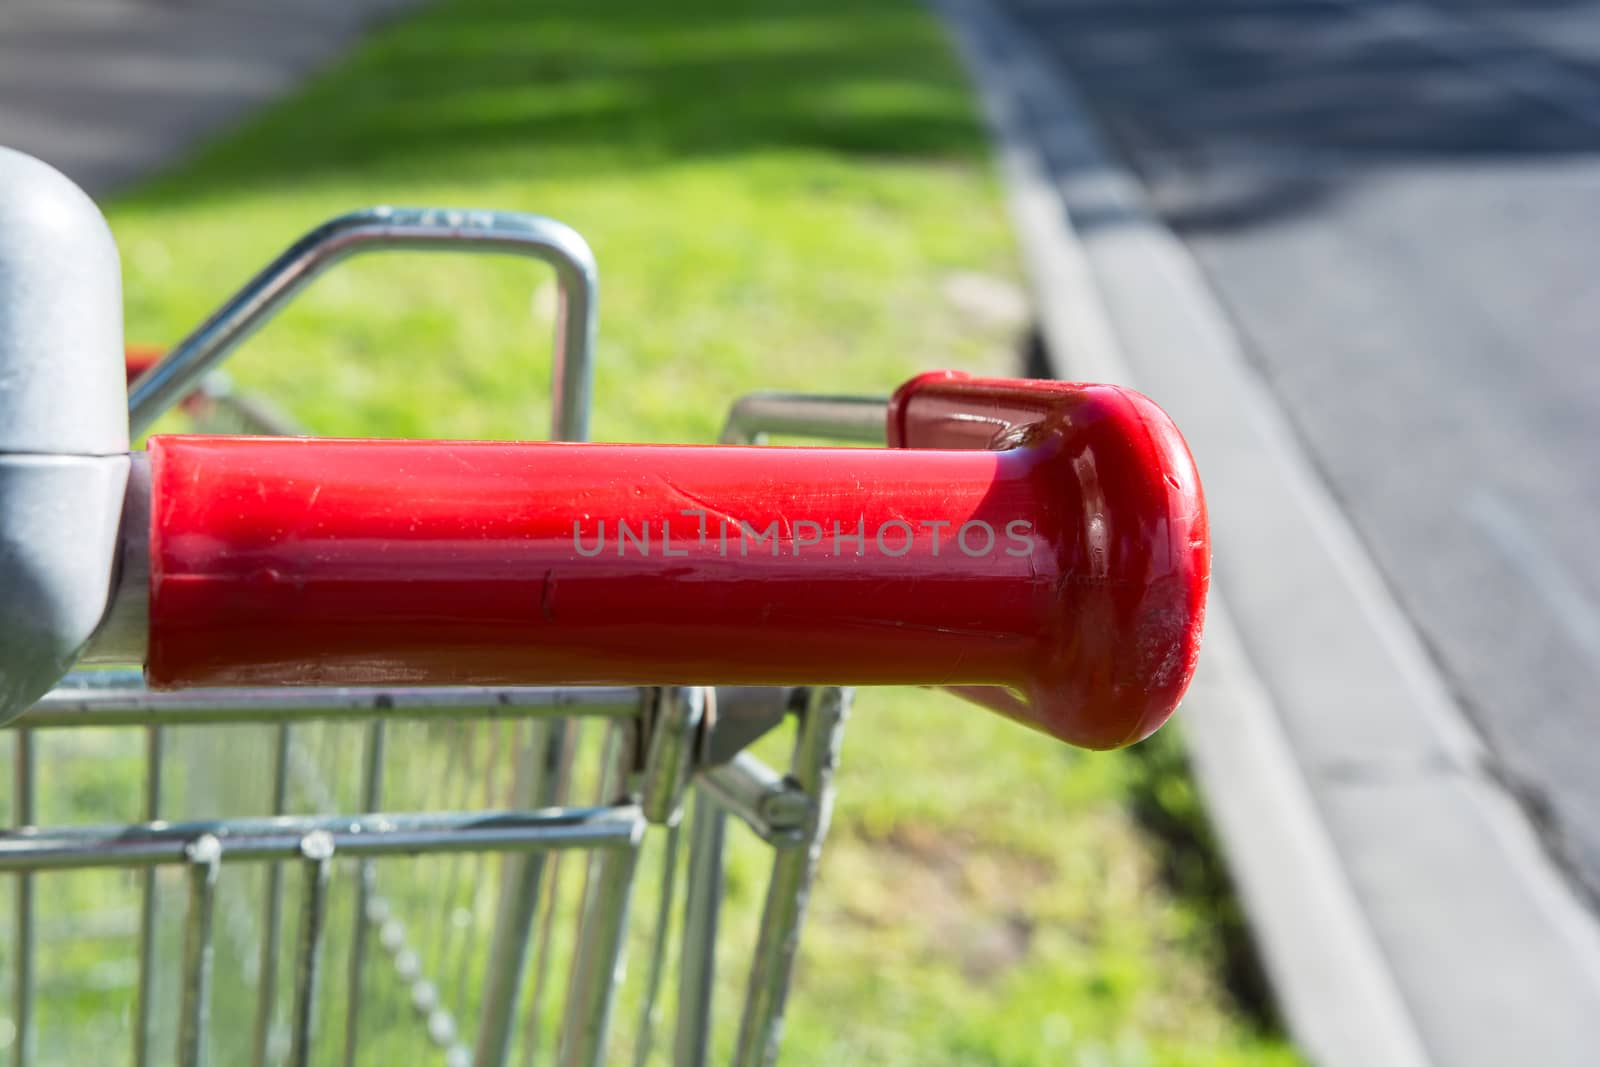 the red trolley handle at the road side